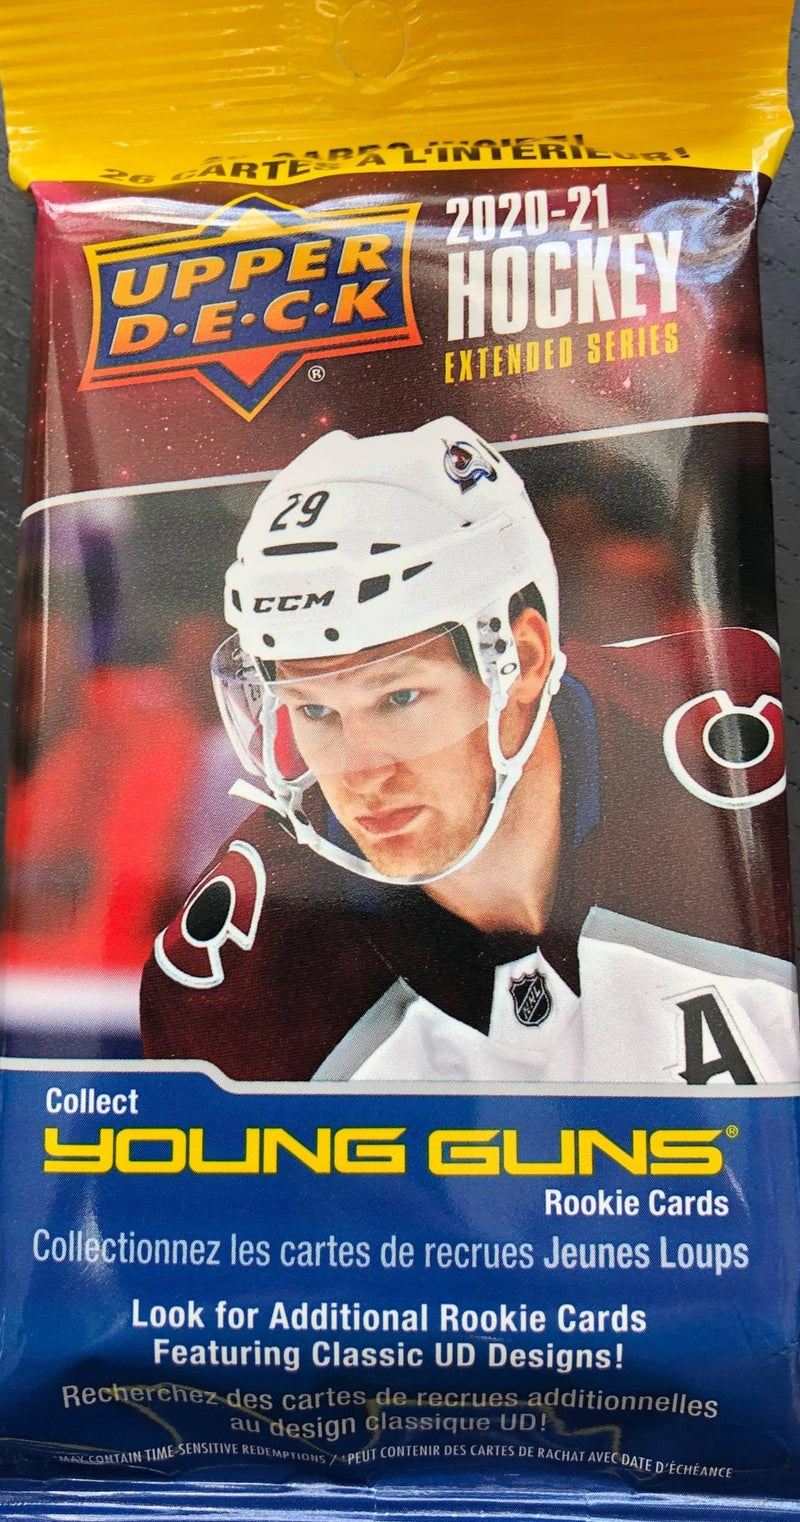 2020 UPPER DECK EXTENDED SERIES HOCKEY FAT PACK